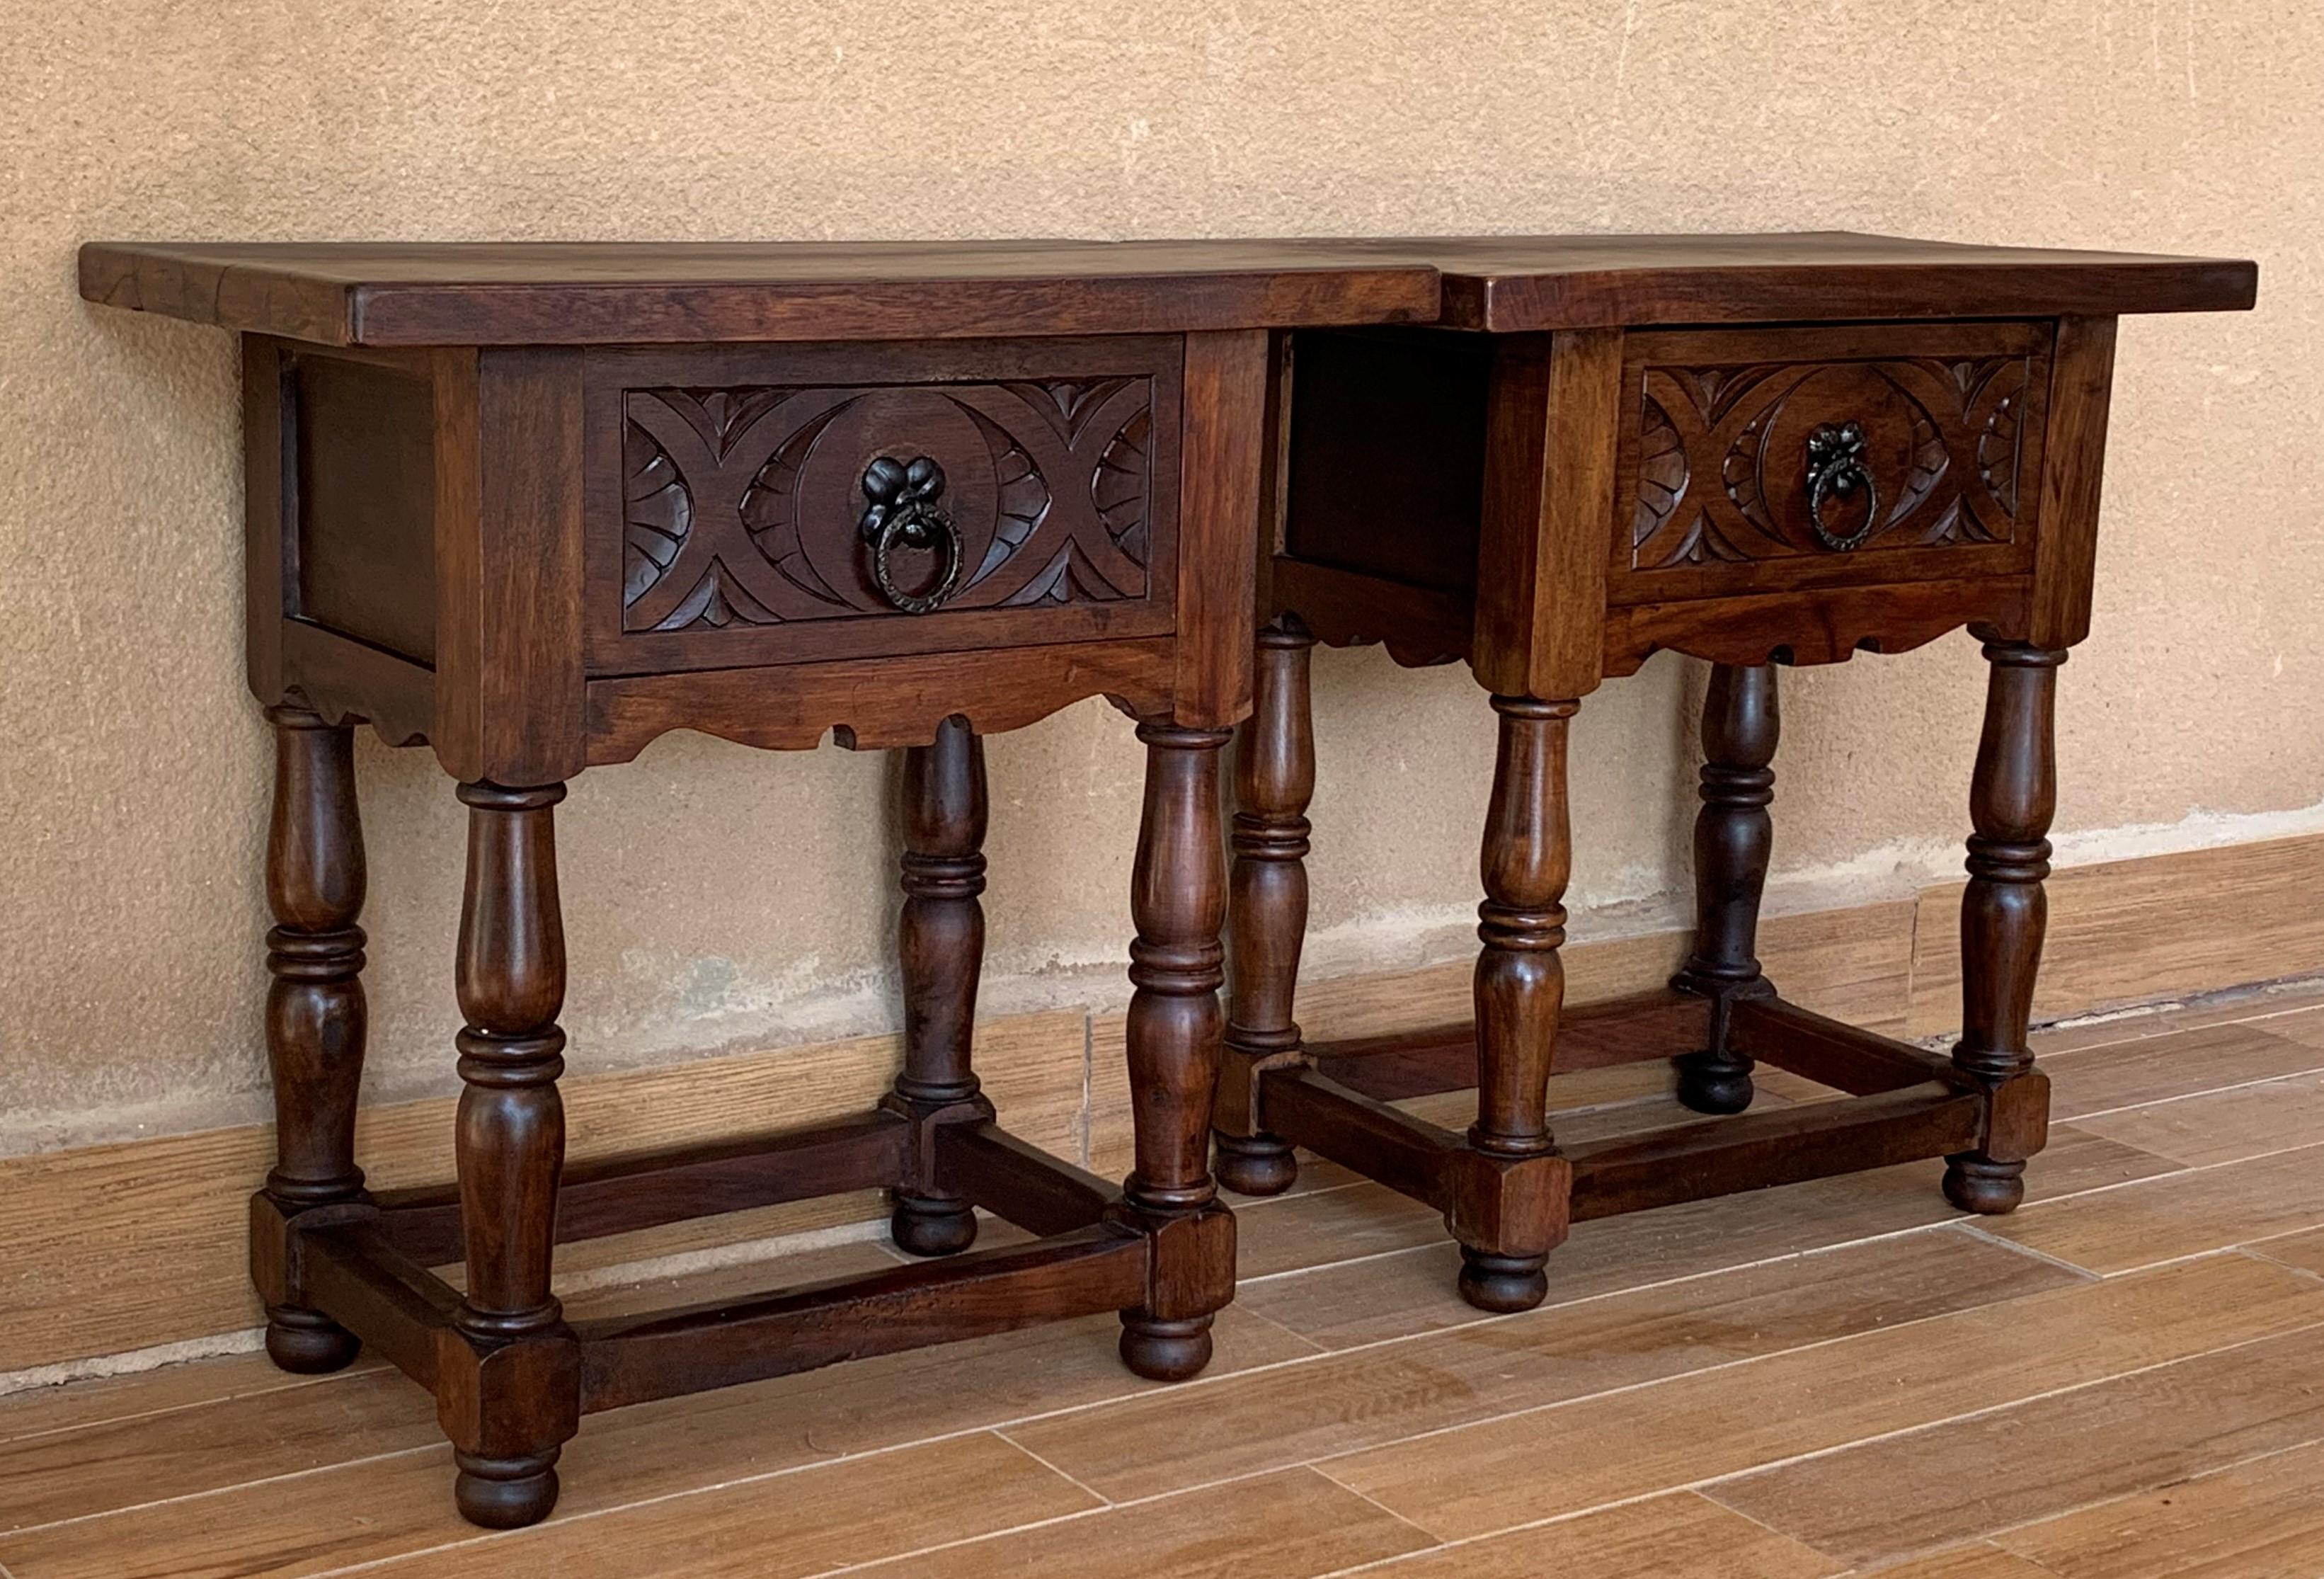 19th century pair of Spanish nightstands in solid walnut with carved drawer and iron hardware.
Beautiful tables that you can use like a nightstands or side tables, end tables, or table lamp.